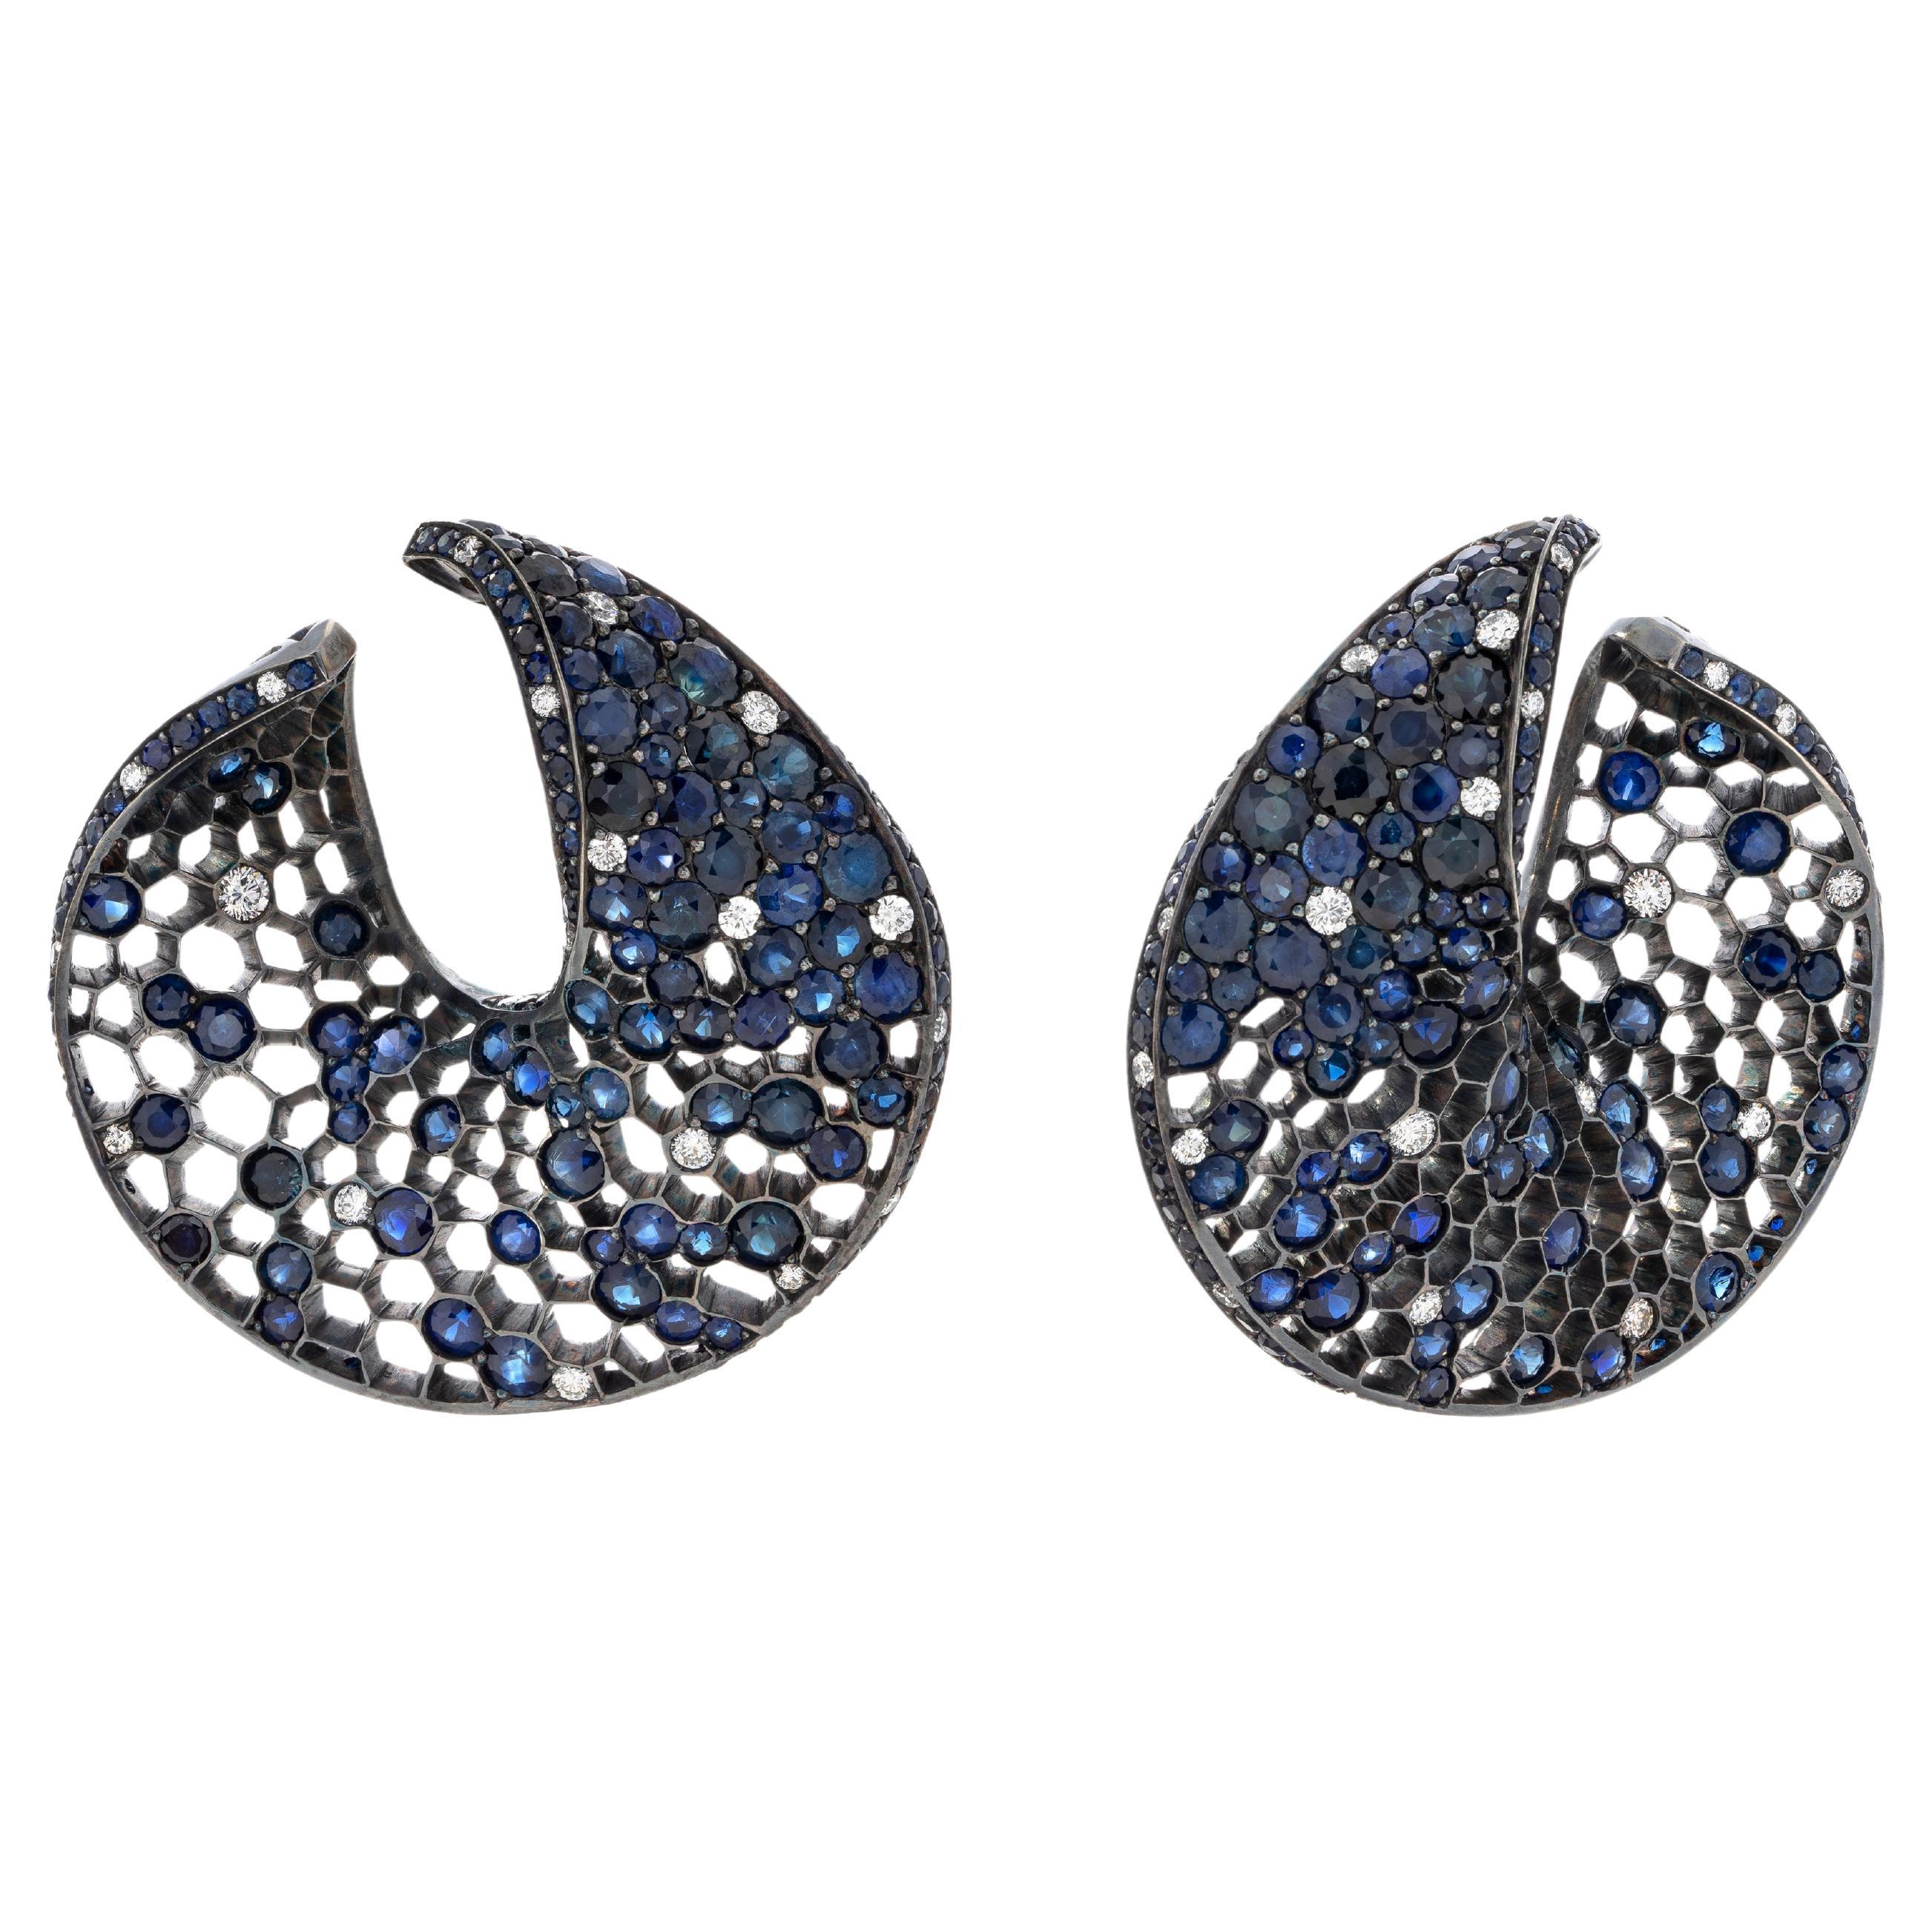 Eternity night earrings, Ceylon sapphires, diamonds, 18K gold and silver For Sale